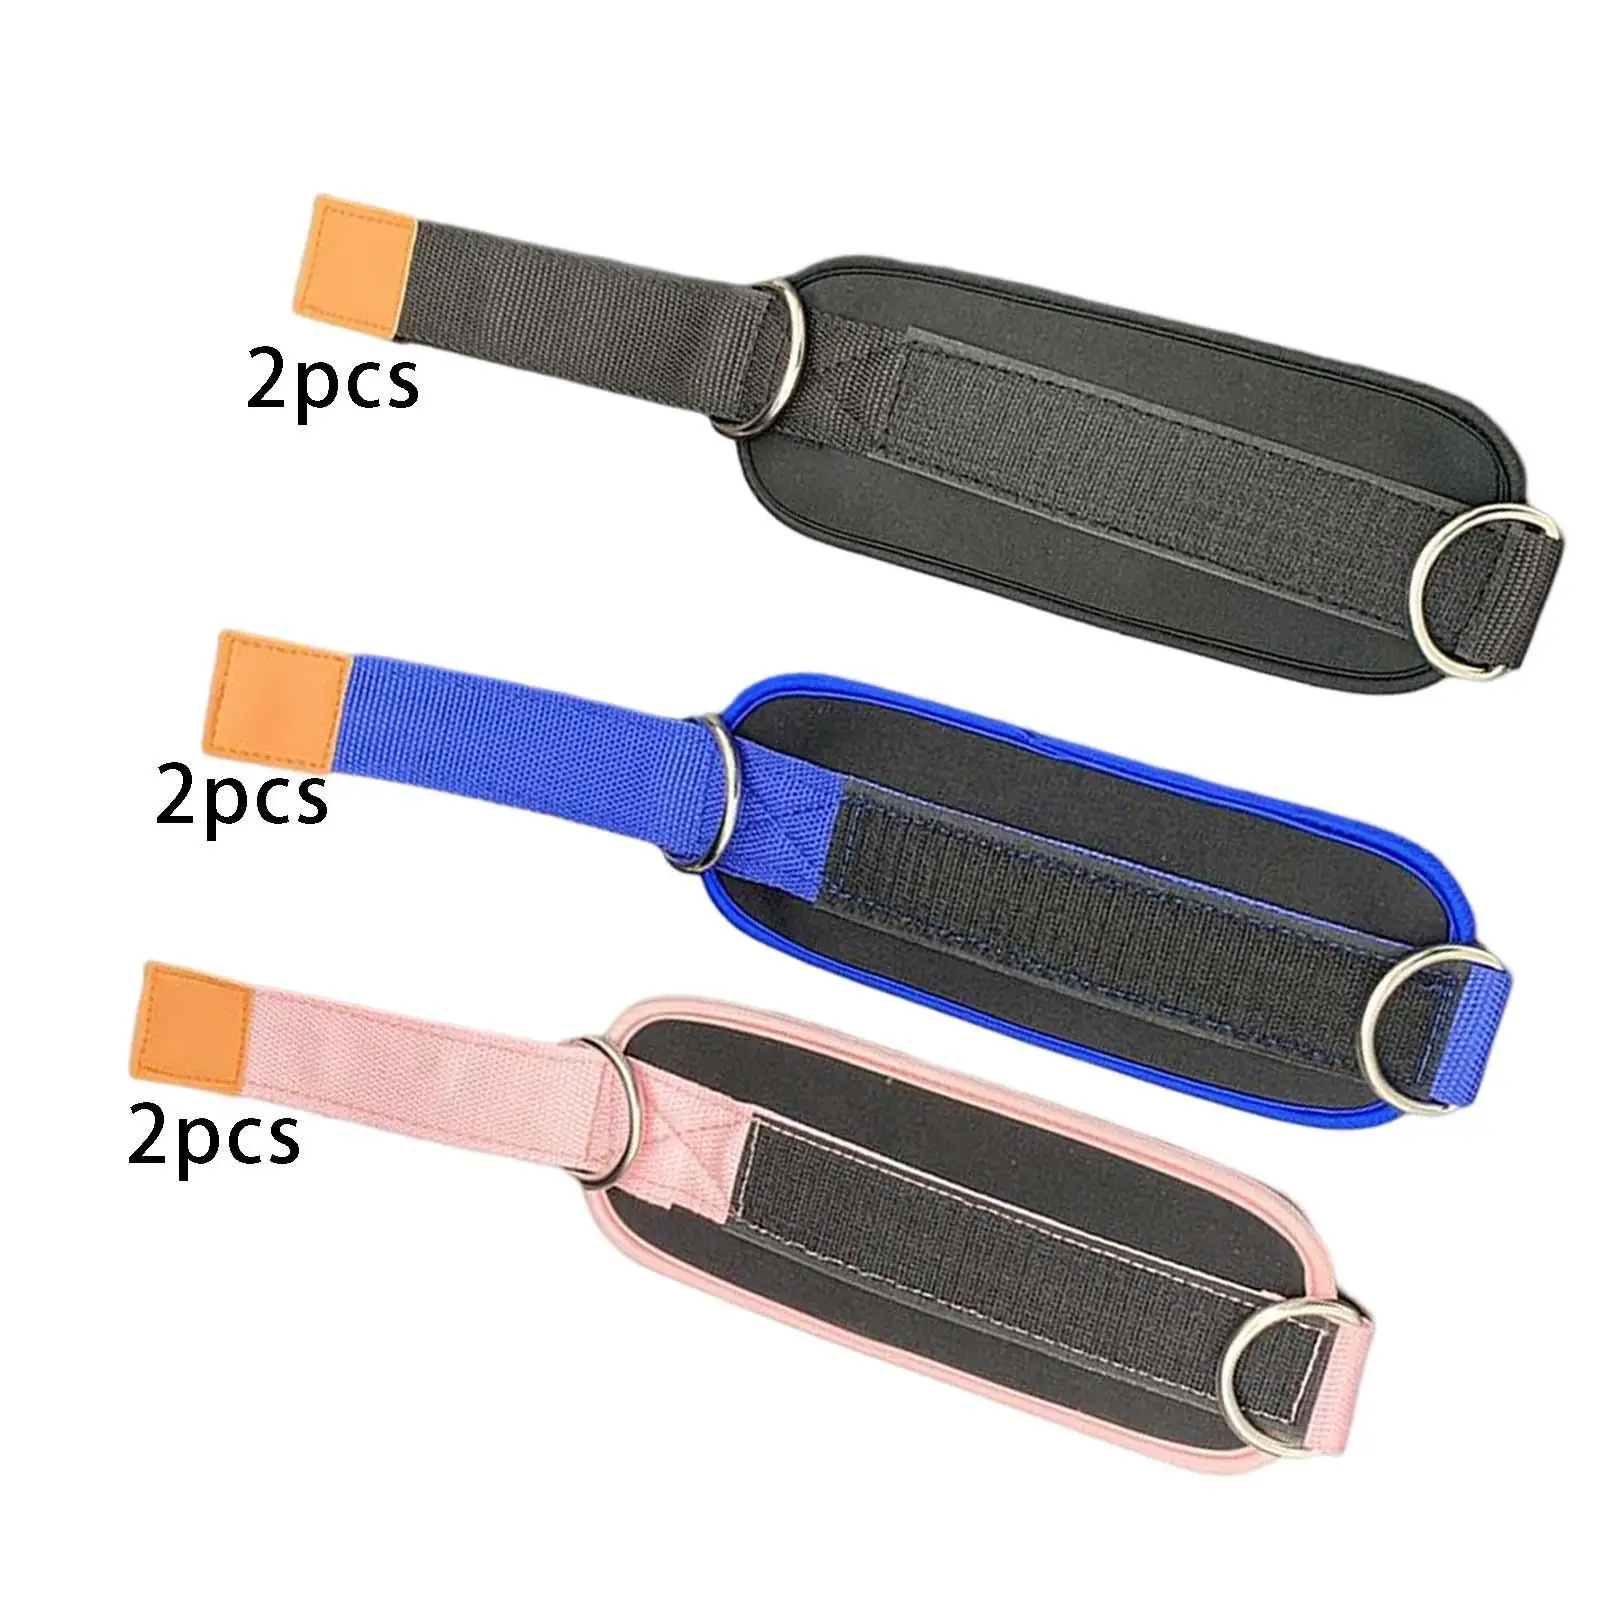 2Pcs Ankle Straps Ankle Cuffs with D Rings Adjustable PU Support Cable Machine Attachments for Glute Workouts Kickbacks Curls 